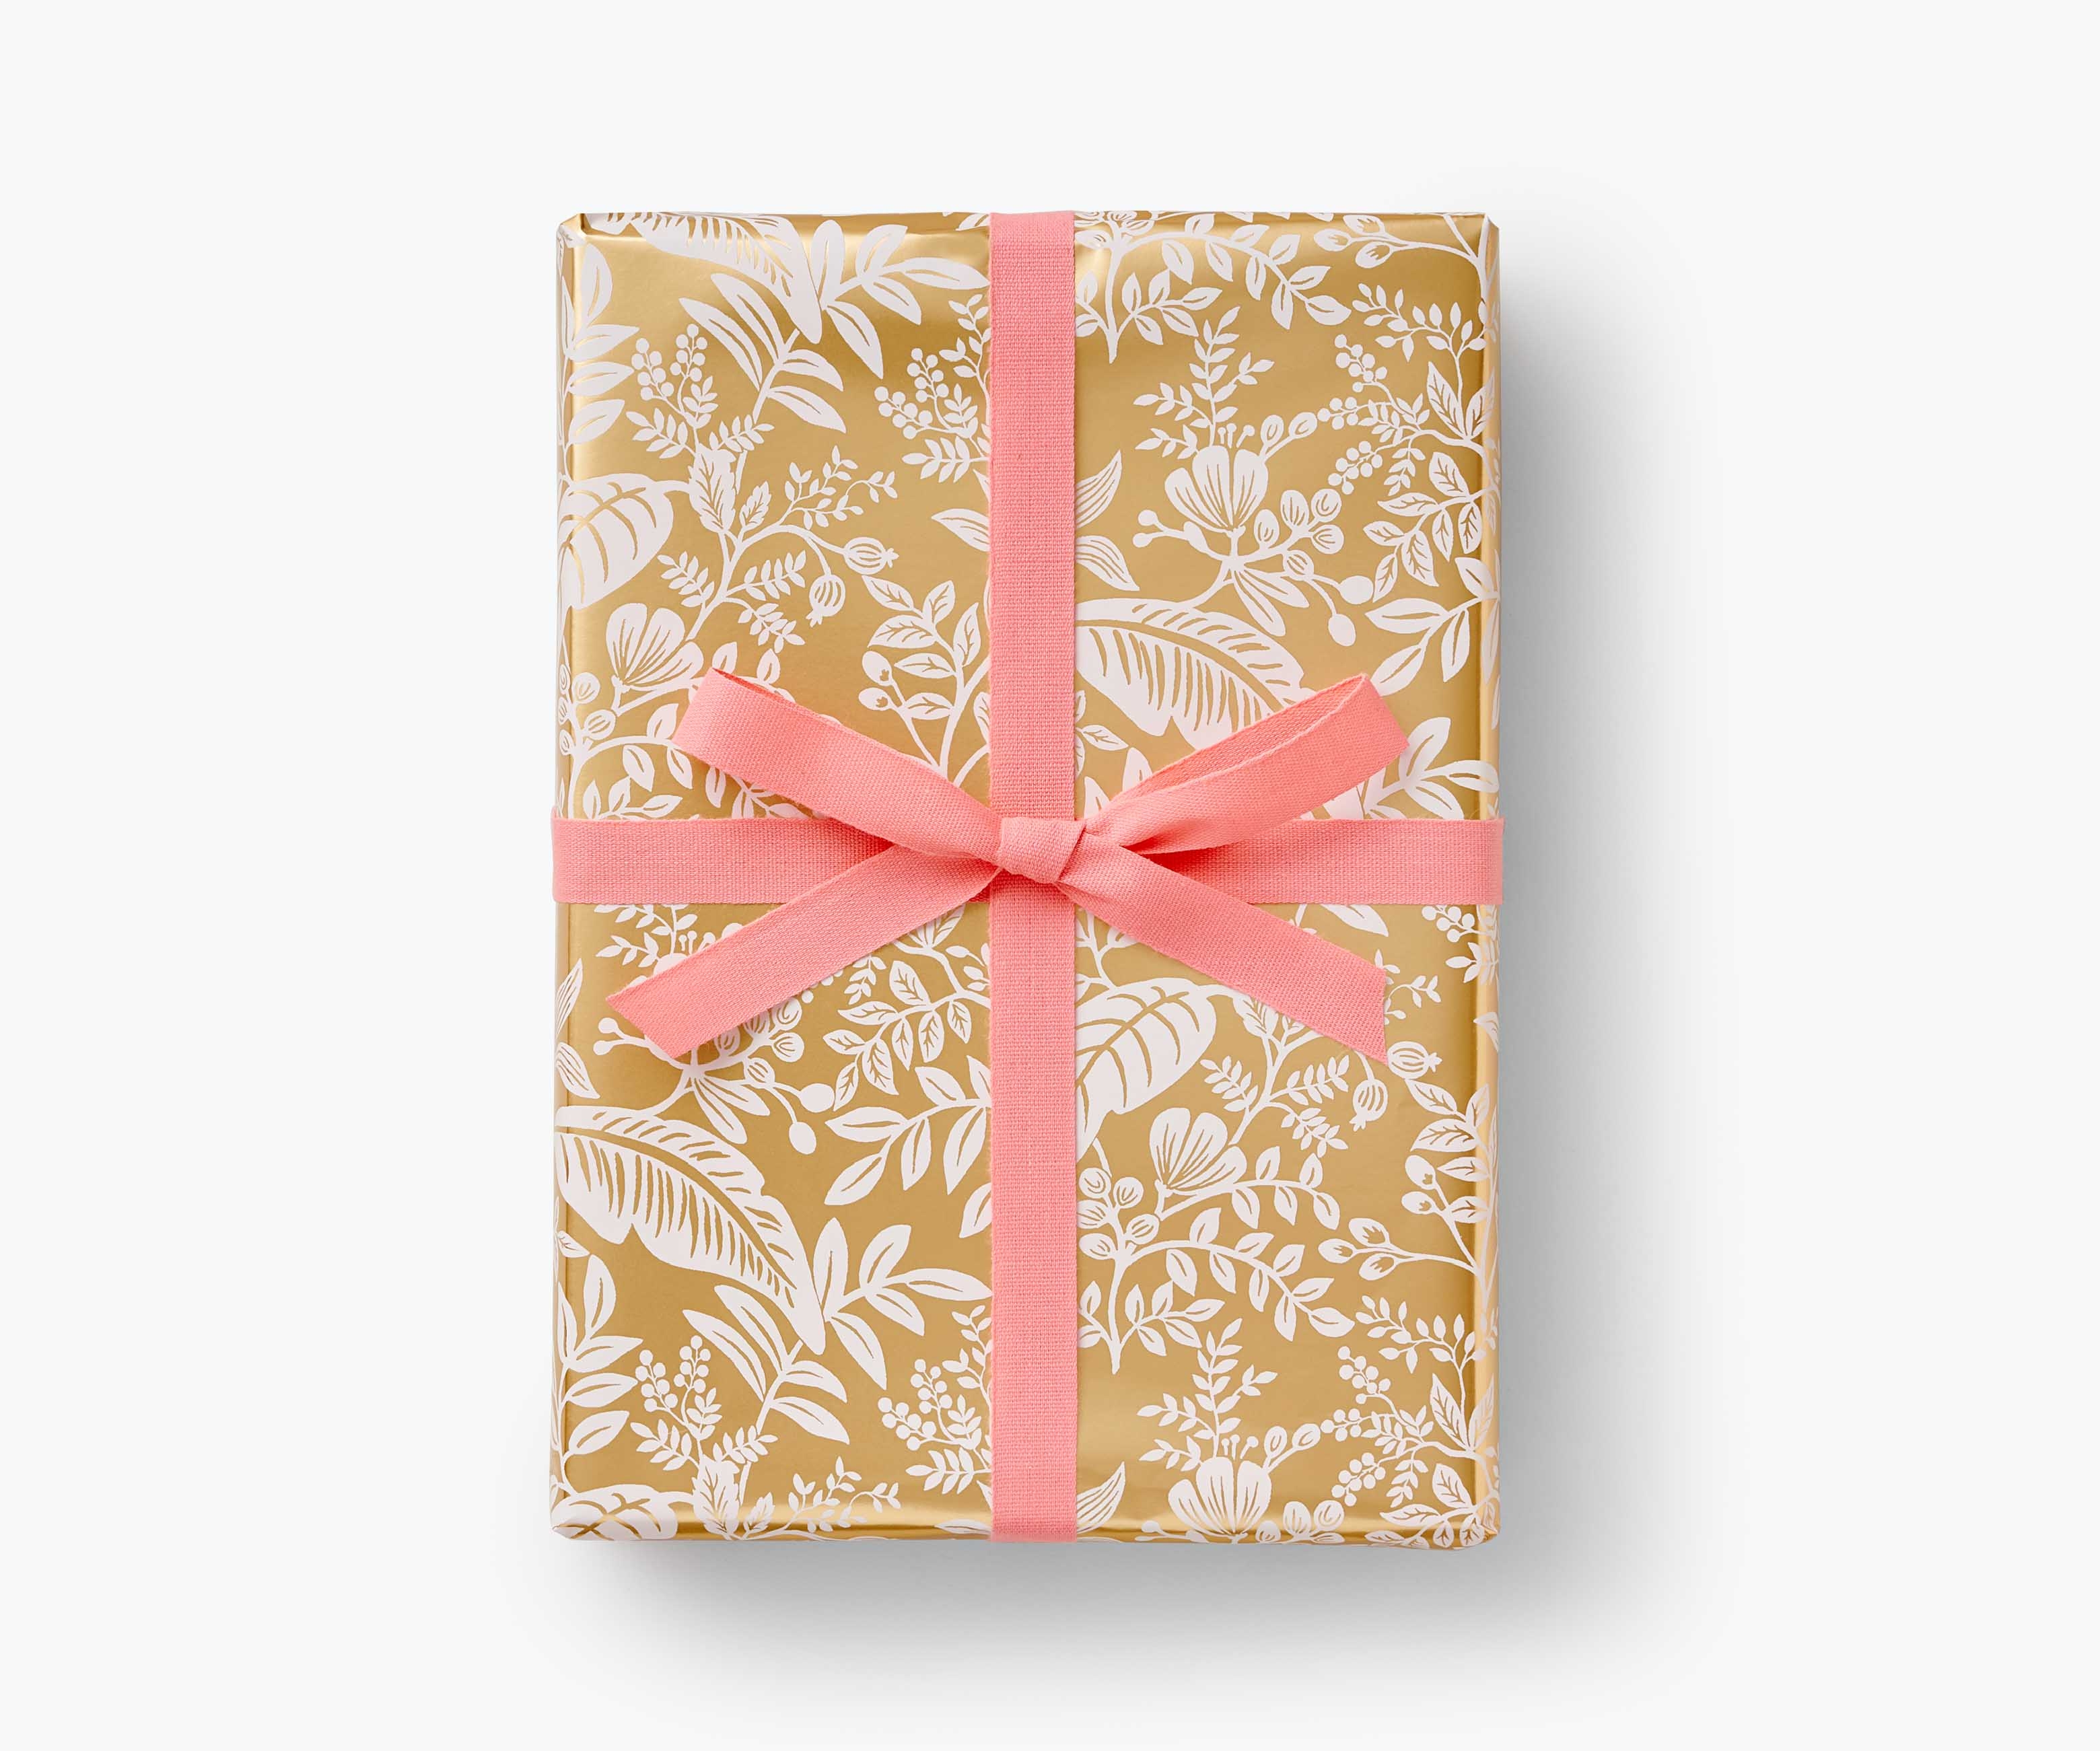 Gold Gloss Wrapping Paper, 24x417' Counter Roll